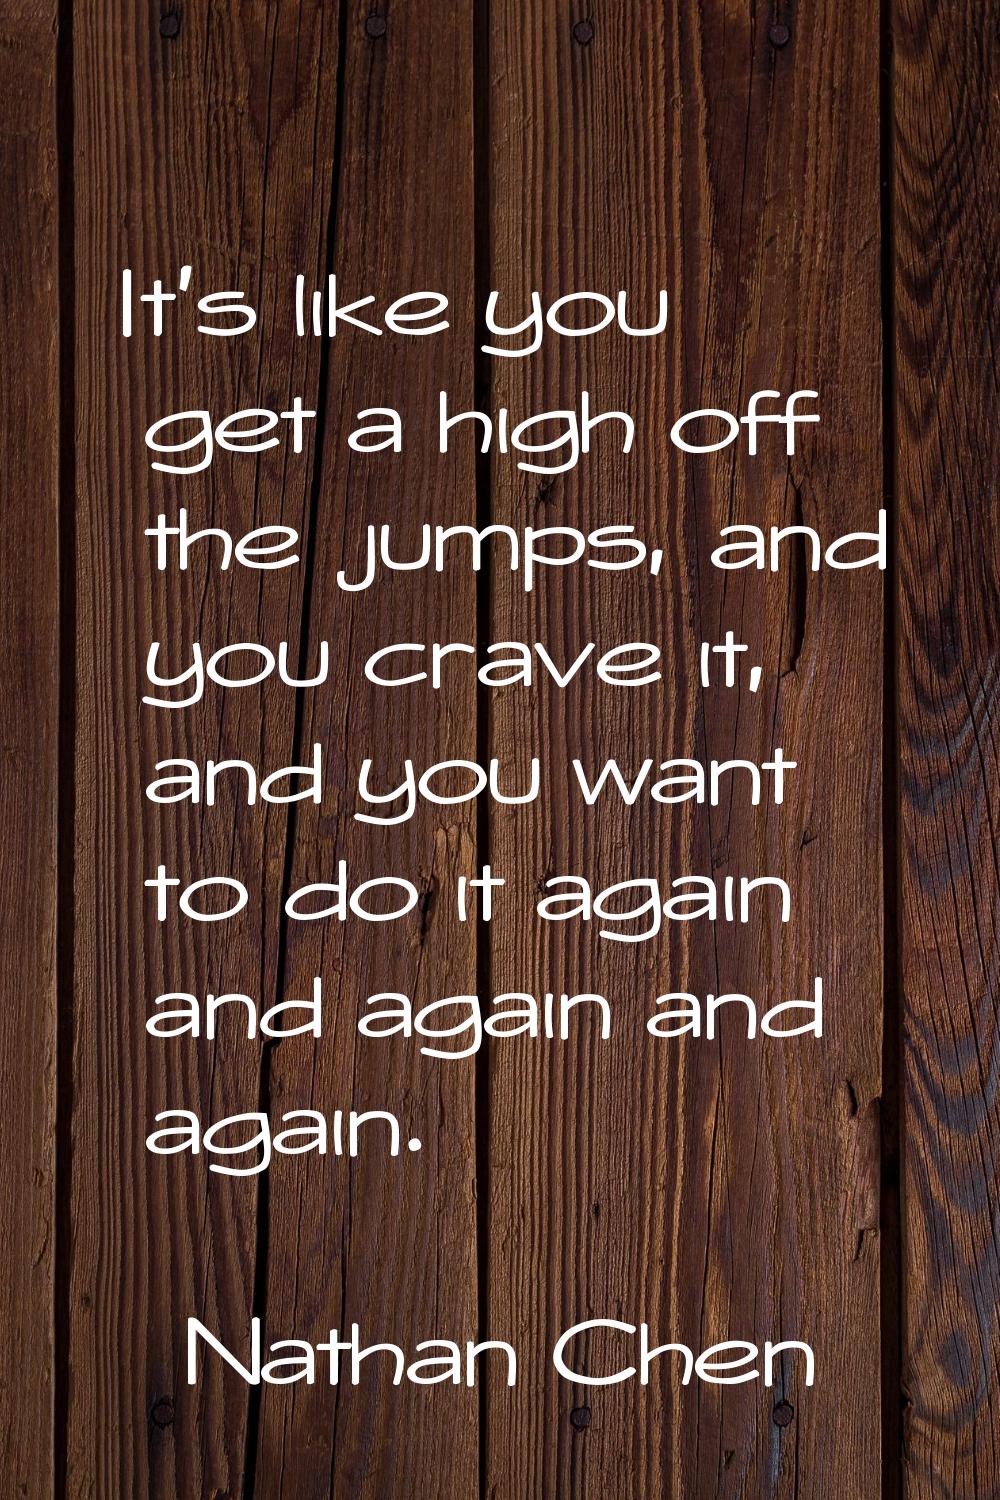 It's like you get a high off the jumps, and you crave it, and you want to do it again and again and